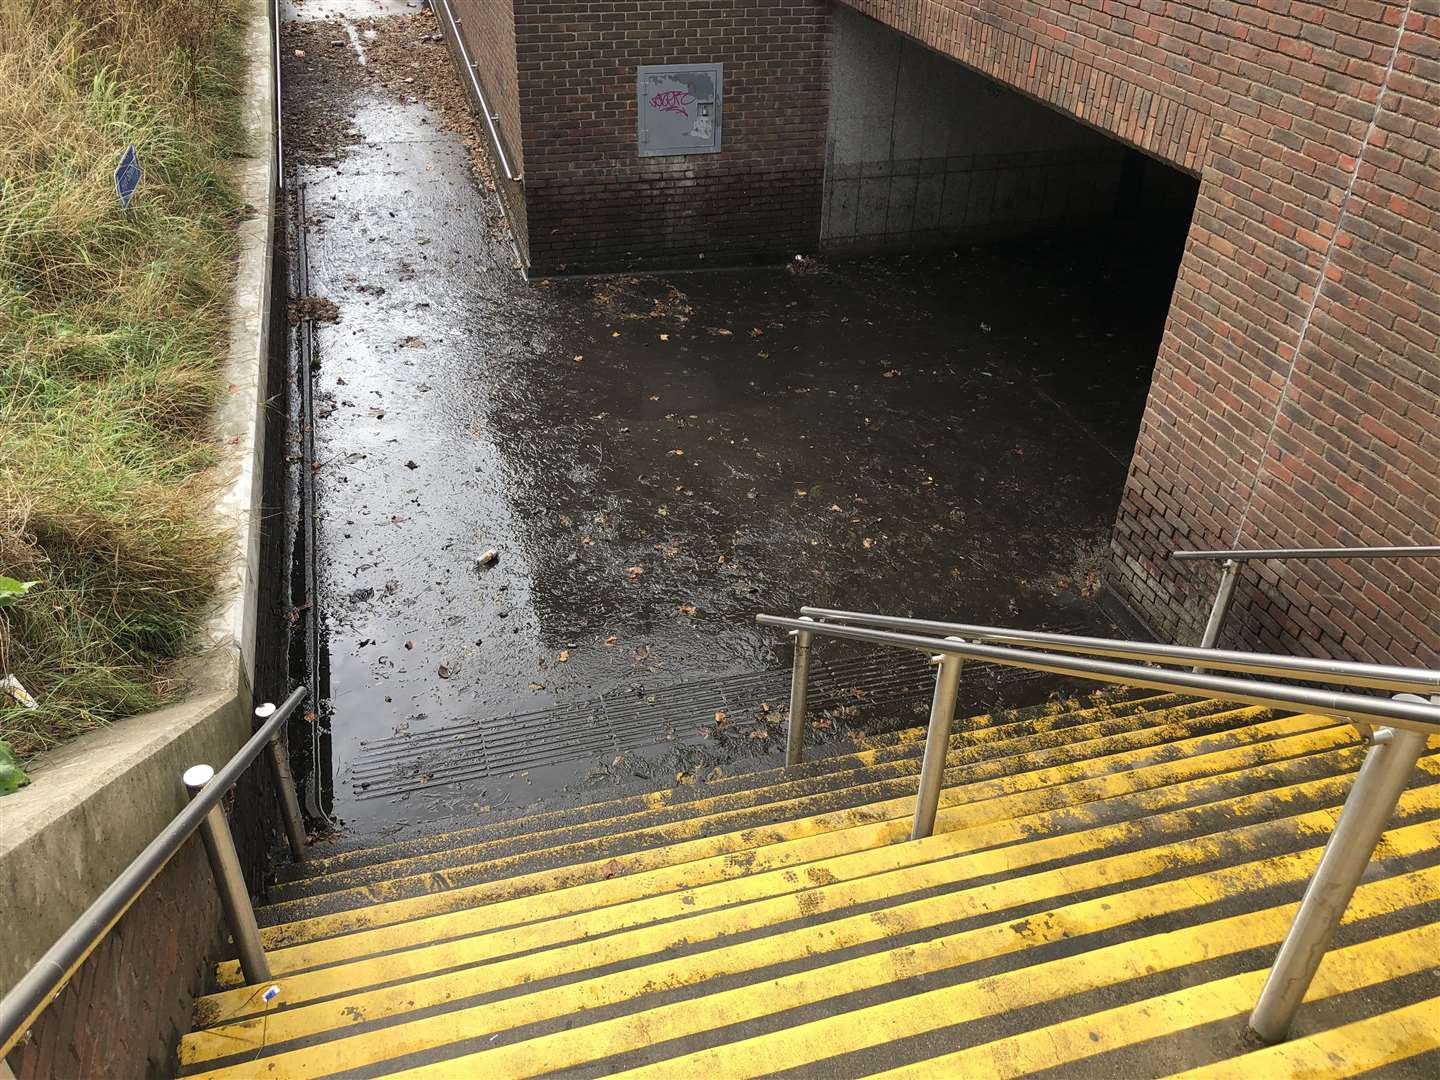 The subway near Broadway in Maidstone was affected by the flooding overnight